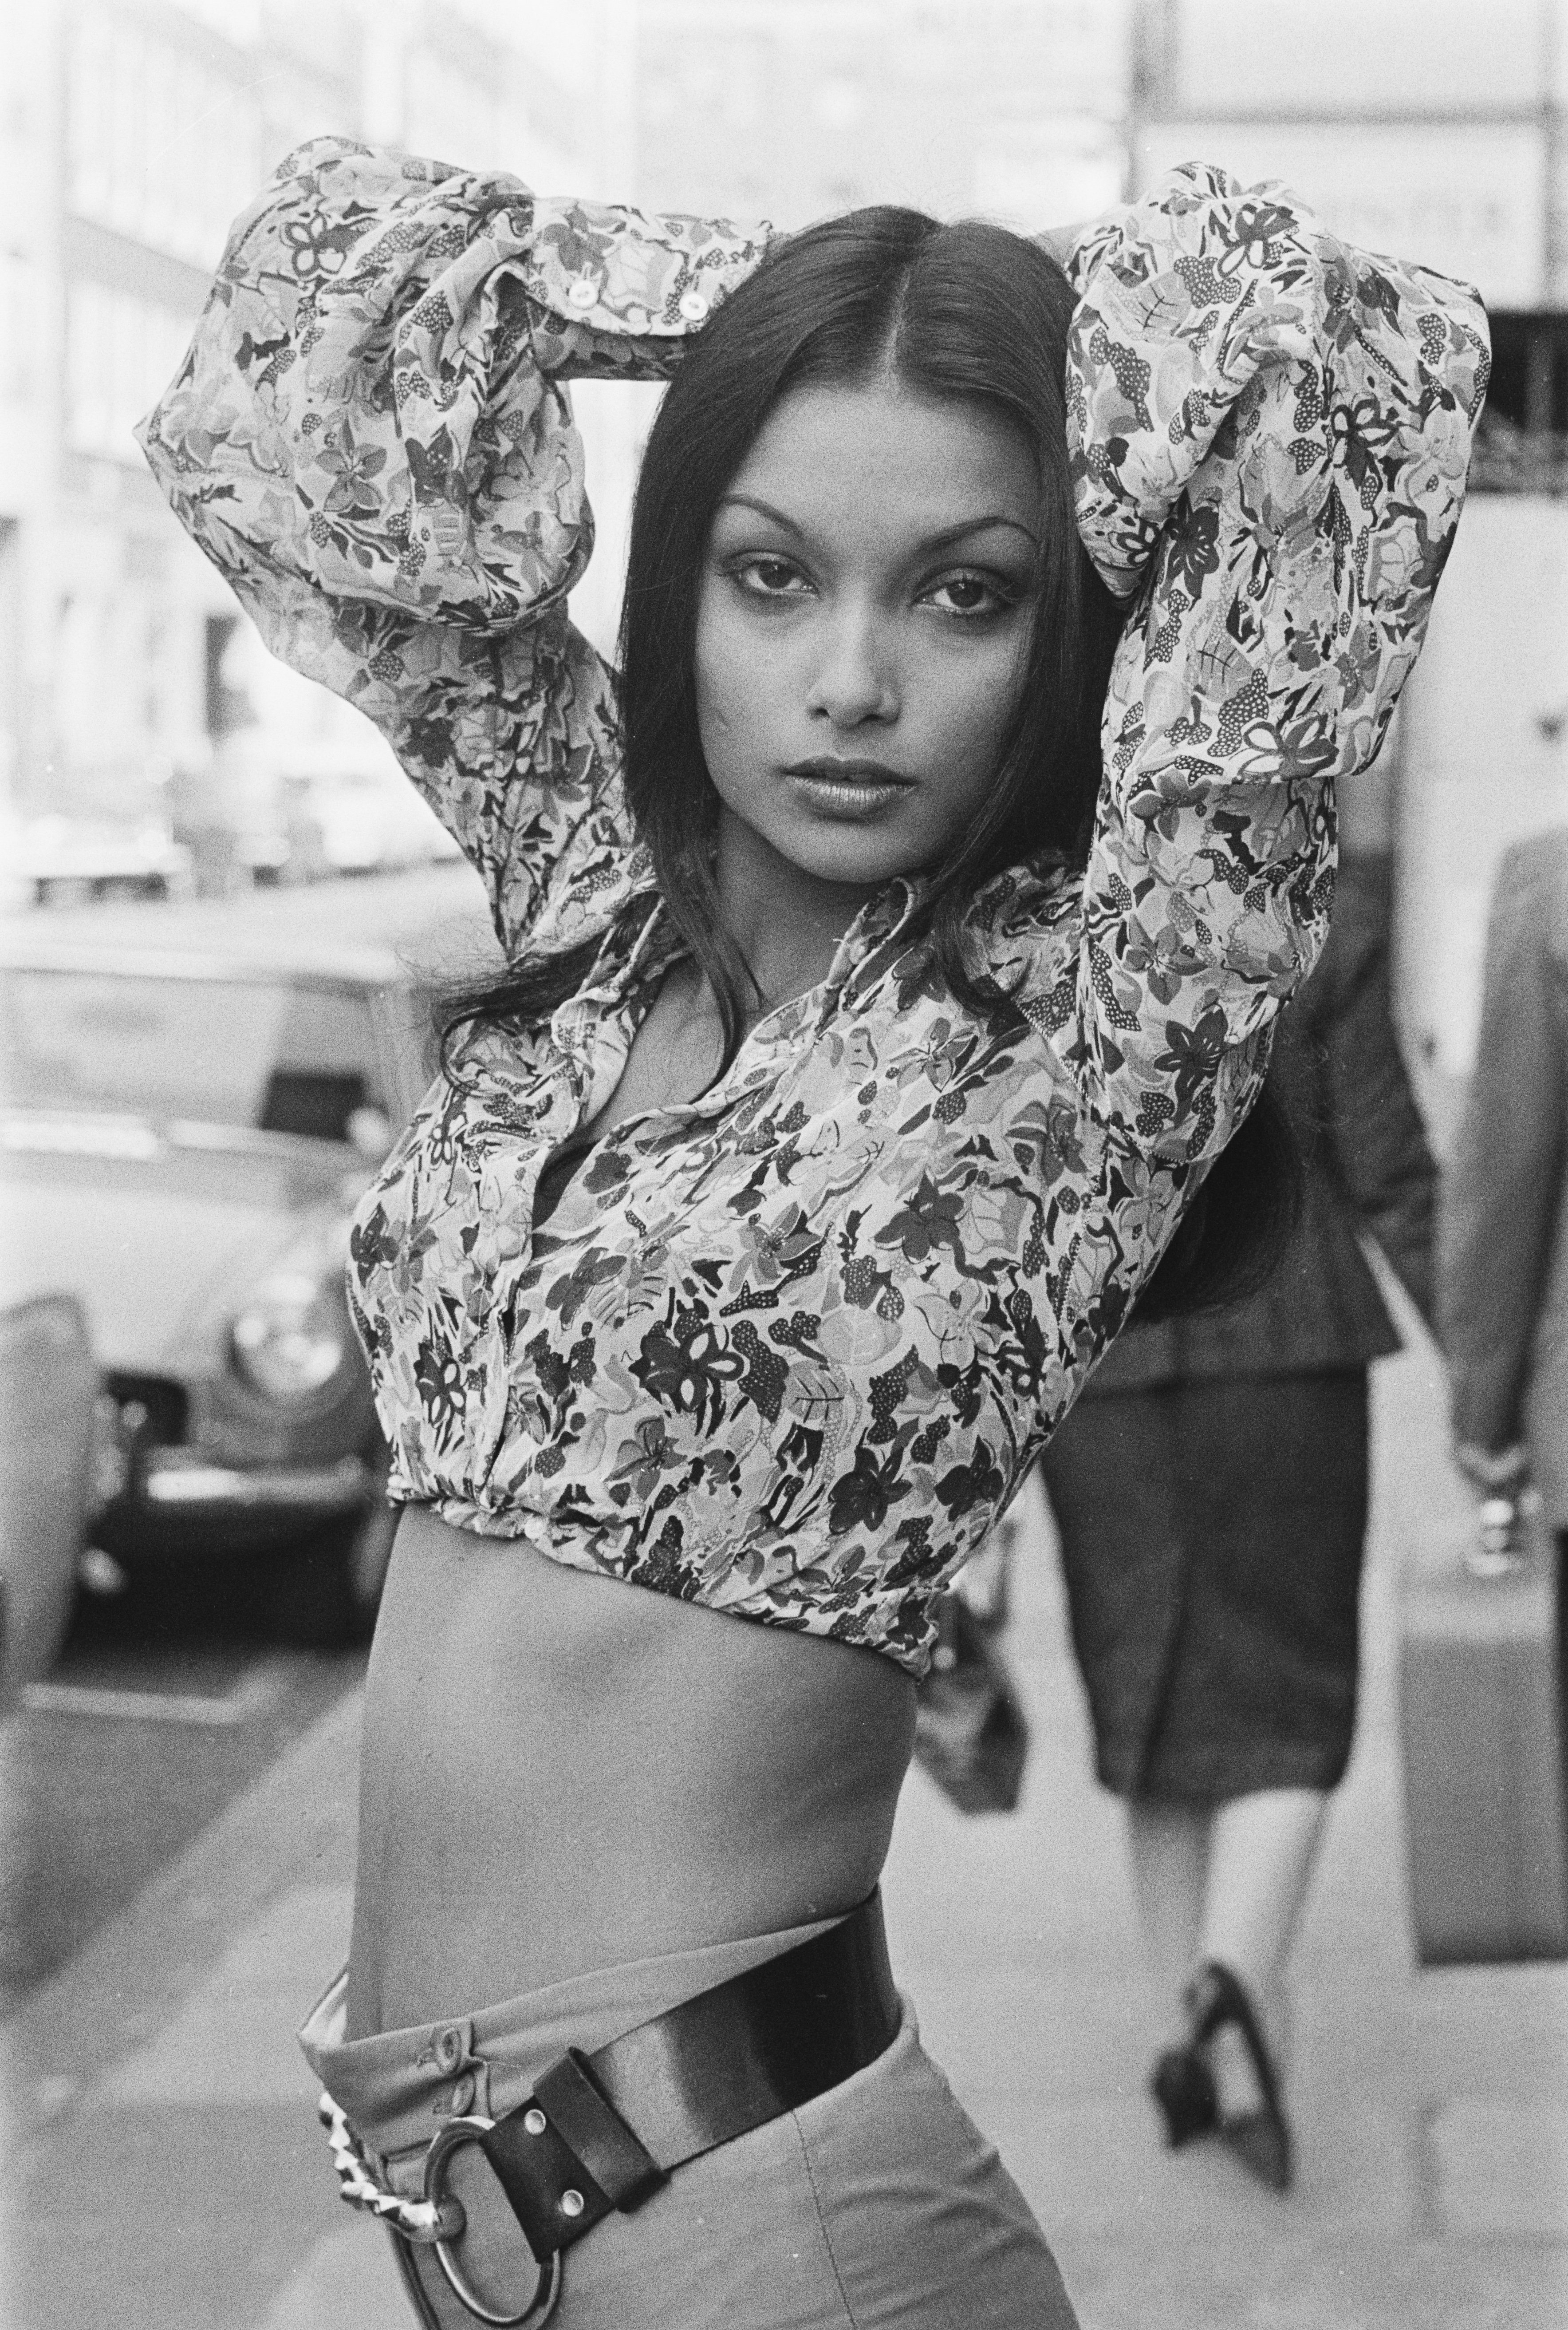 Guyanese actress and fashion model Shakira Baksh in September 1971, United Kingdom. / Source: Getty Images